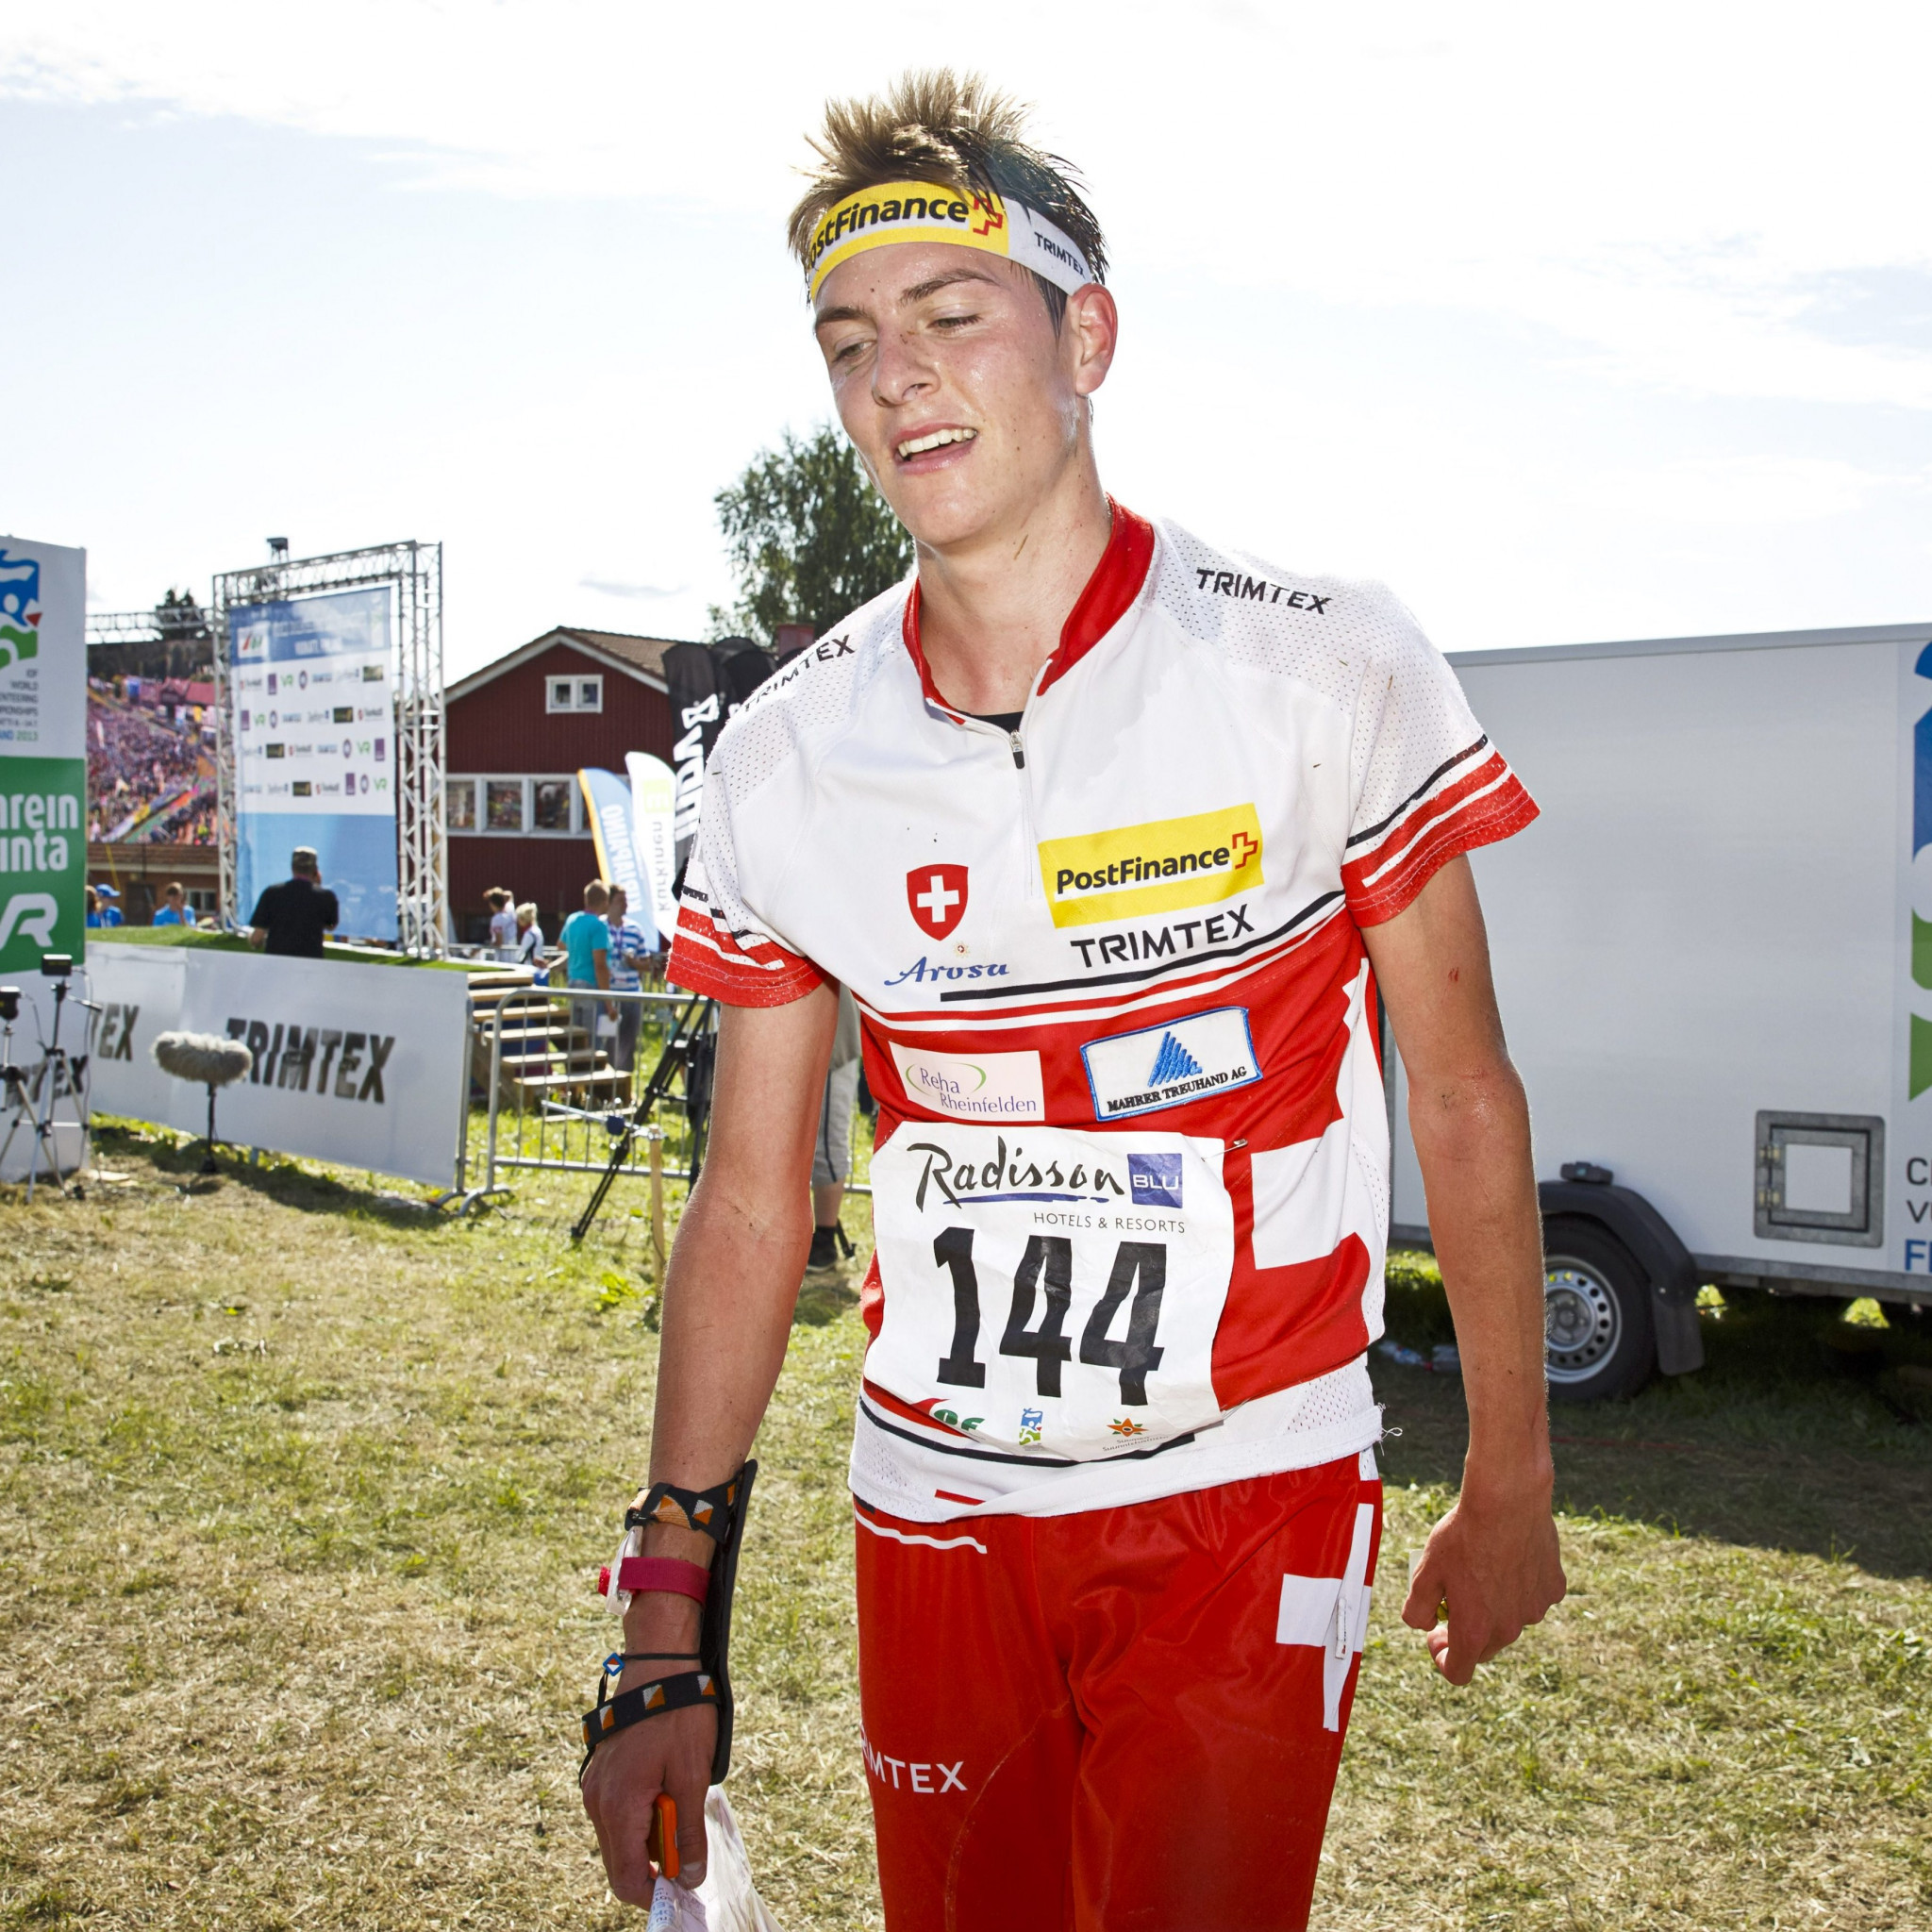 Home hope Matthias Kyburz, winner of the knockout sprint yesterday at the European Orienteering Championships in Neuchâtel, could only finish 11th today in a men's sprint won by Sweden's Emil Svensk ©Getty Images